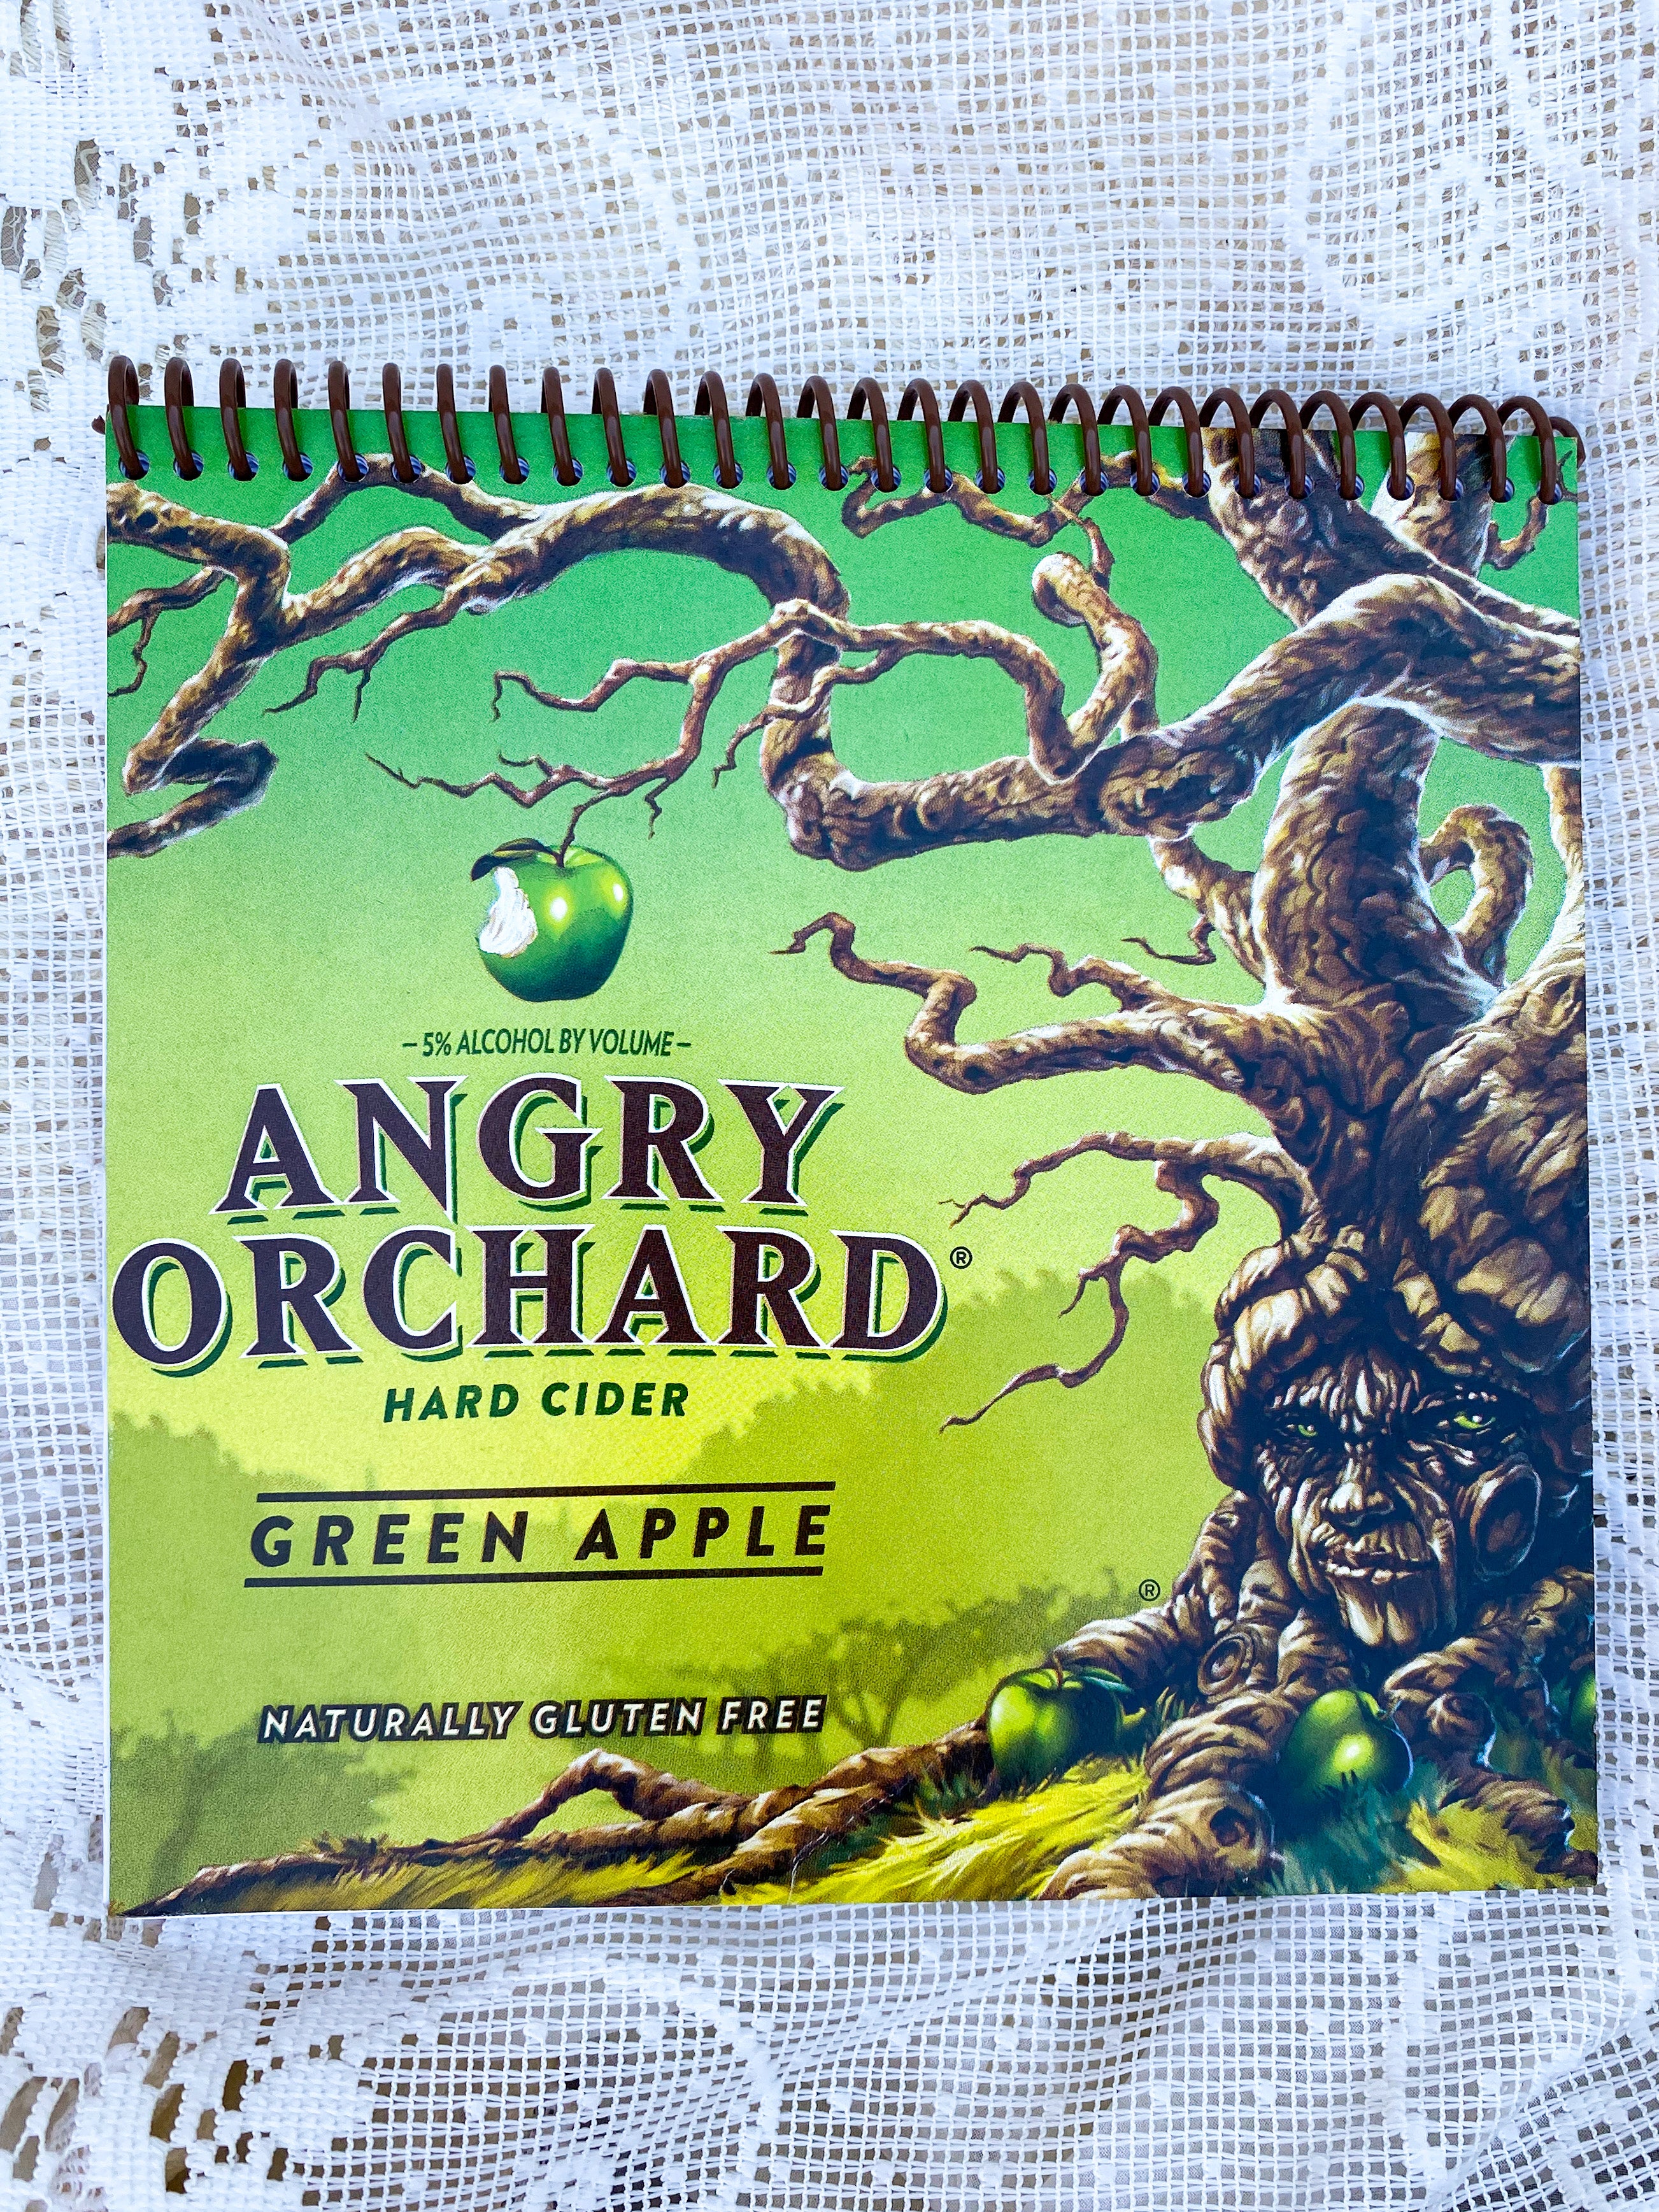 Angry Orchard Green Apple Recycled Beer Carton Notebook - Brown Spiral